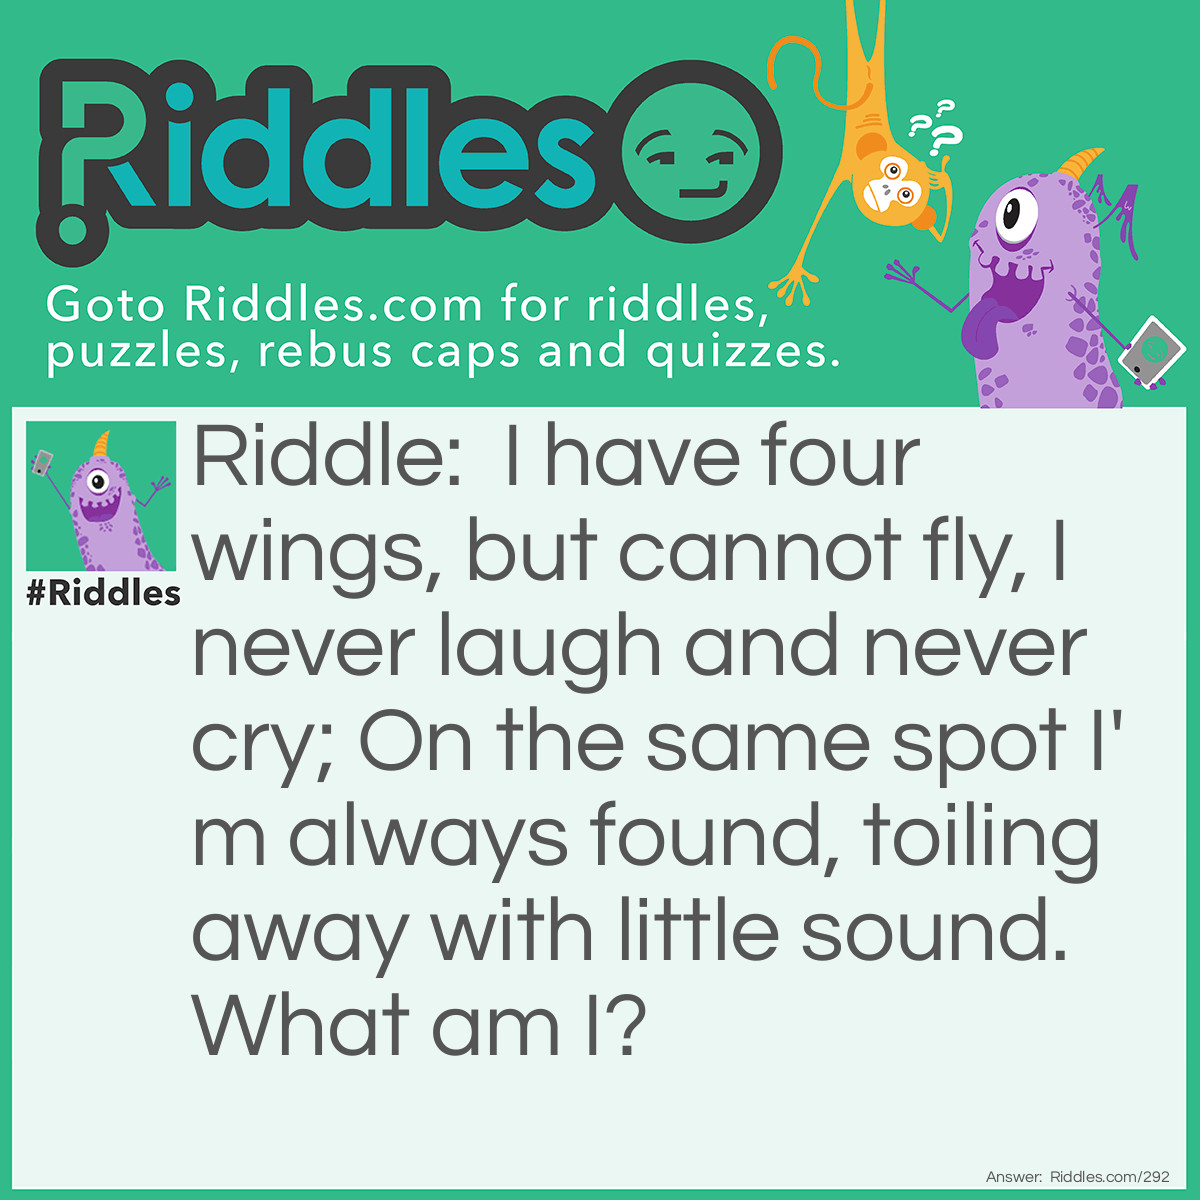 Riddle: I have four wings, but cannot fly, I never <a title="laugh" href="/funny-riddles">laugh</a> and never cry; On the same spot, I'm always found, toiling away with little sound. What am I? Answer: A Windmill.